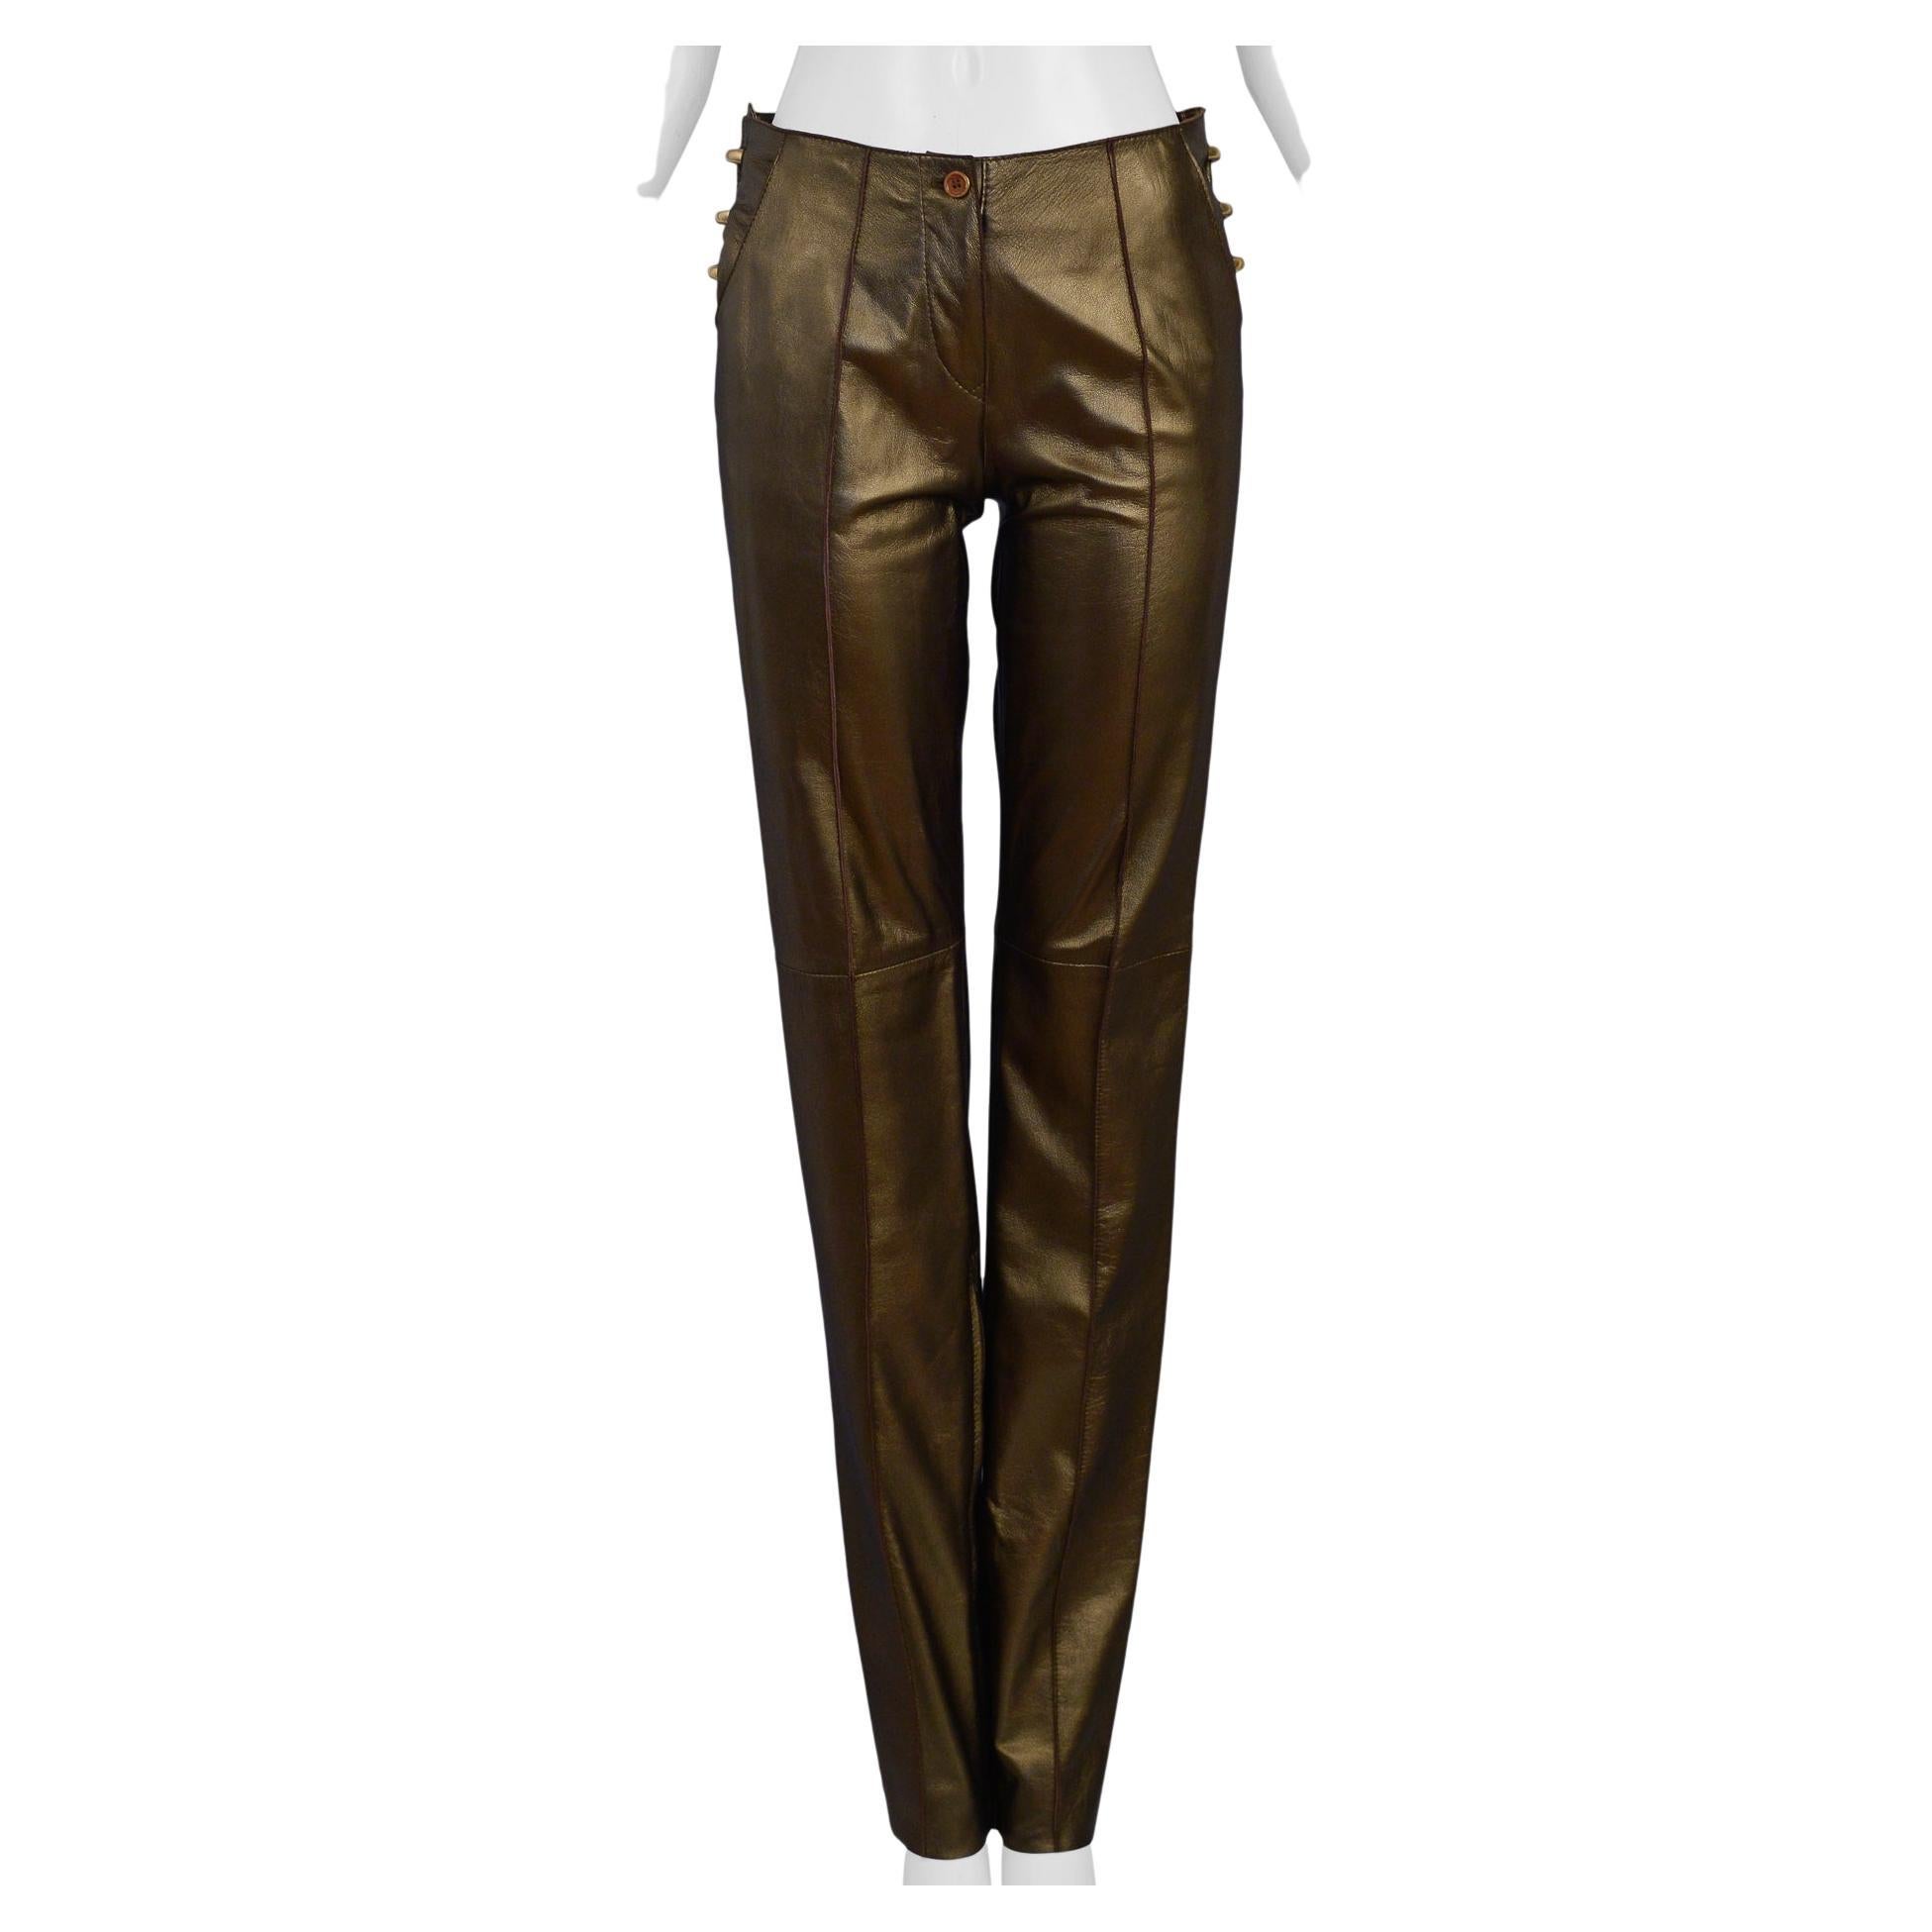 Gianfranco Ferre Bronze Leather Pants 1997 For Sale